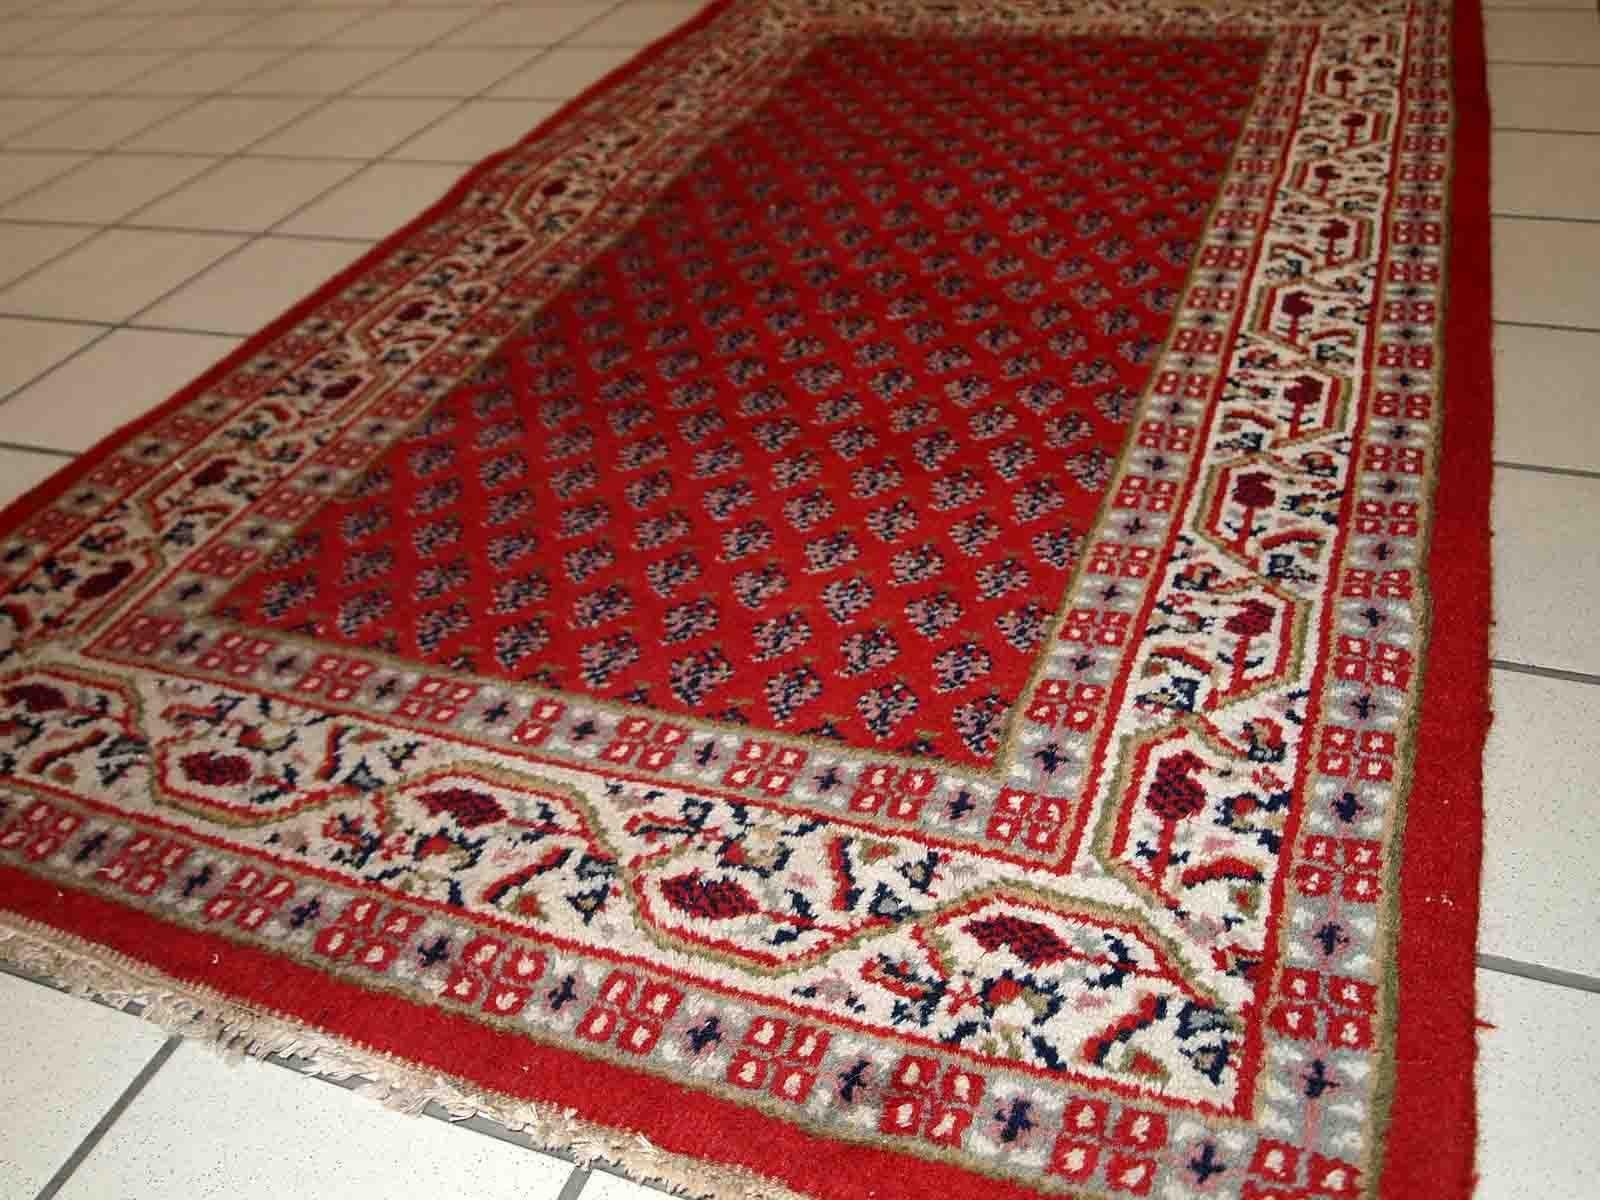 Vintage handmade Middle Eastern rug from the end of 20th century. The rug is in original good condition. It is in traditional classic design.

-condition: original good, 

-circa: 1970s,

-size: 3' x 5.3' (93cm x 162cm),

-material: